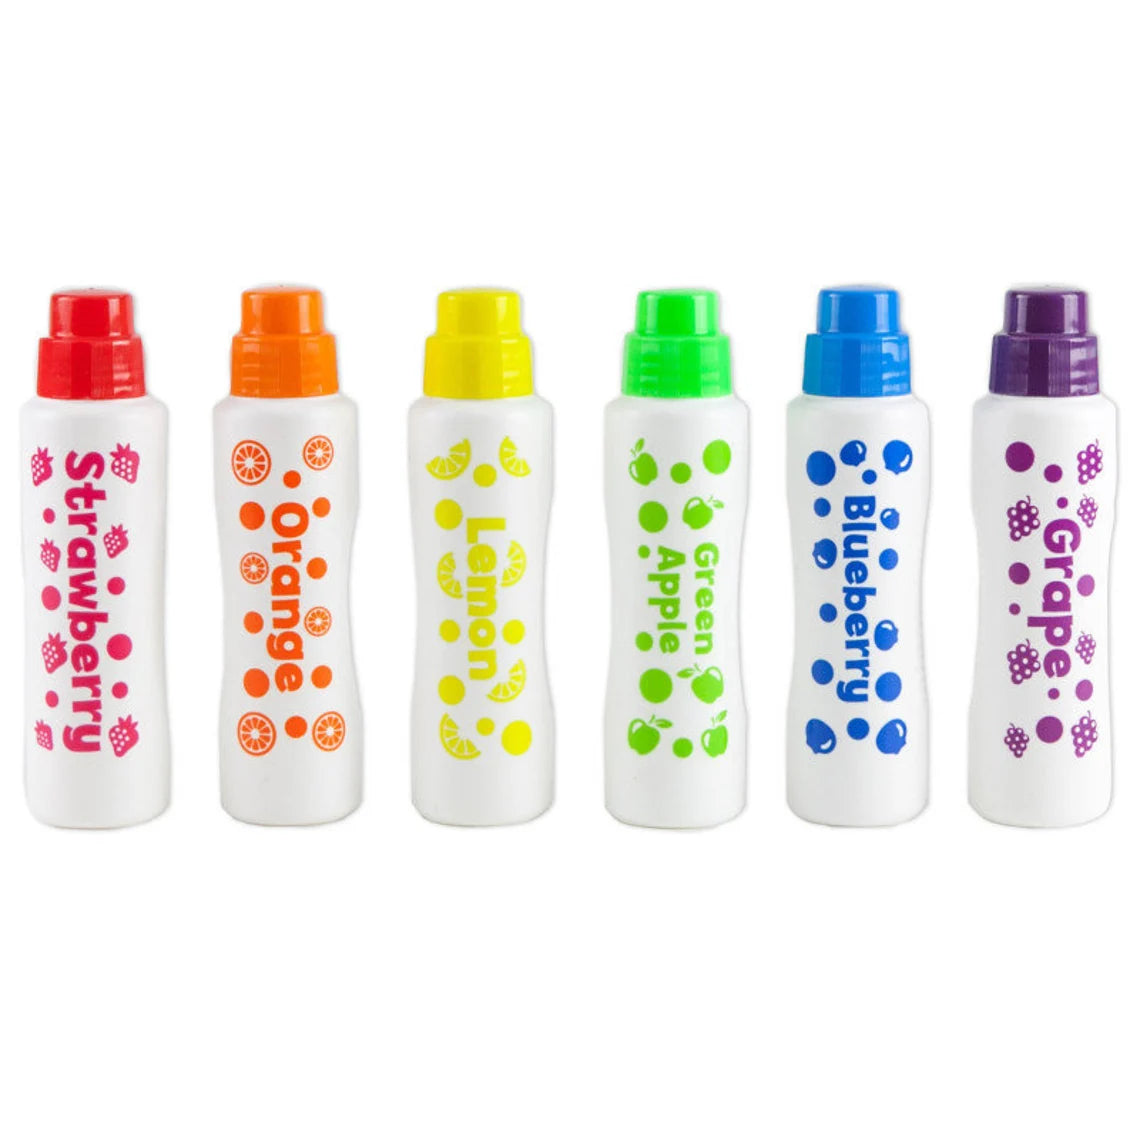 Scented Juicy Fruit Markers